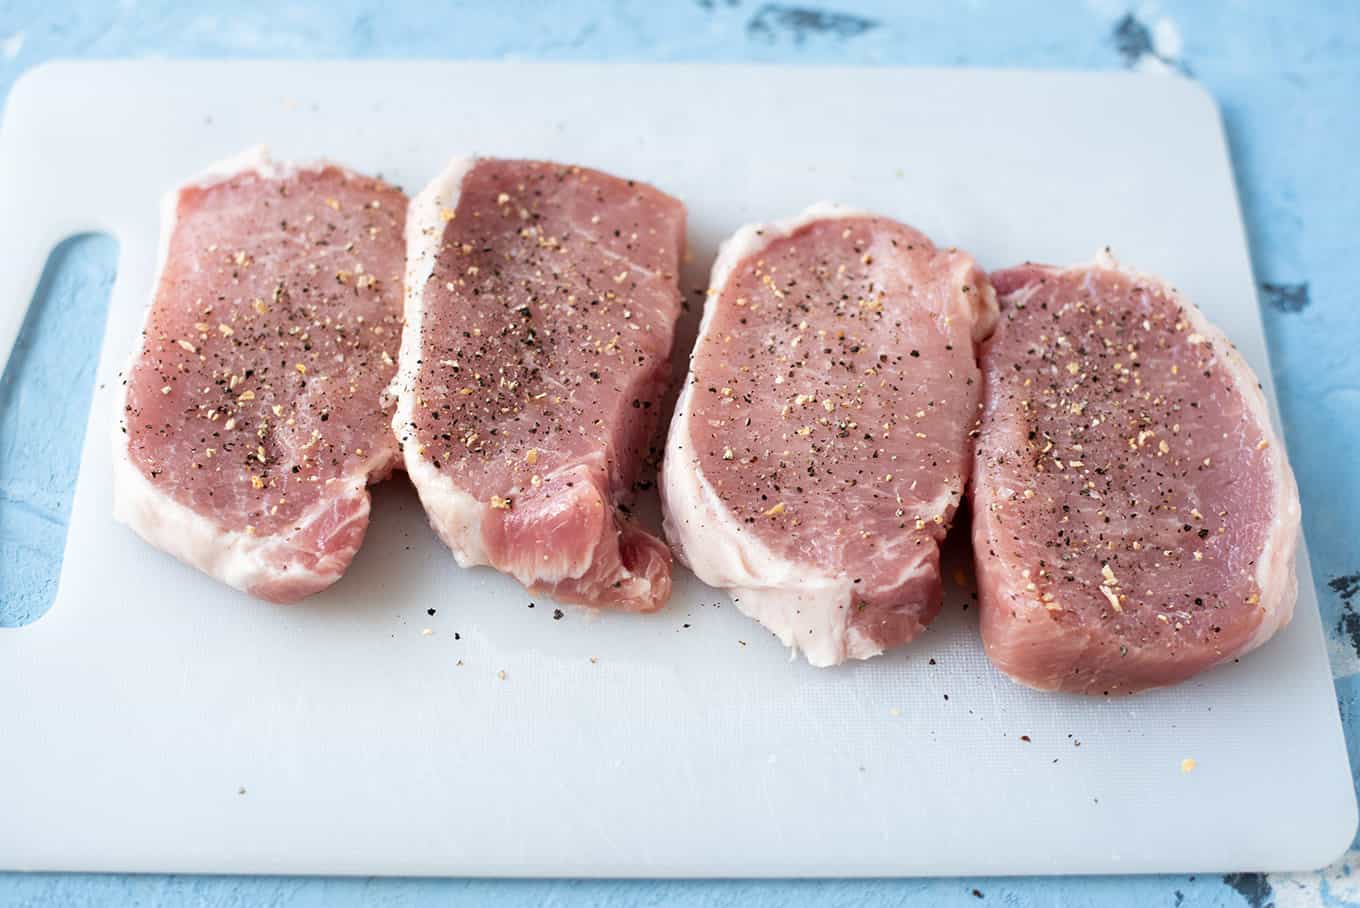 Sliced and seasoned raw pork chops on a cutting board ready for grilling.